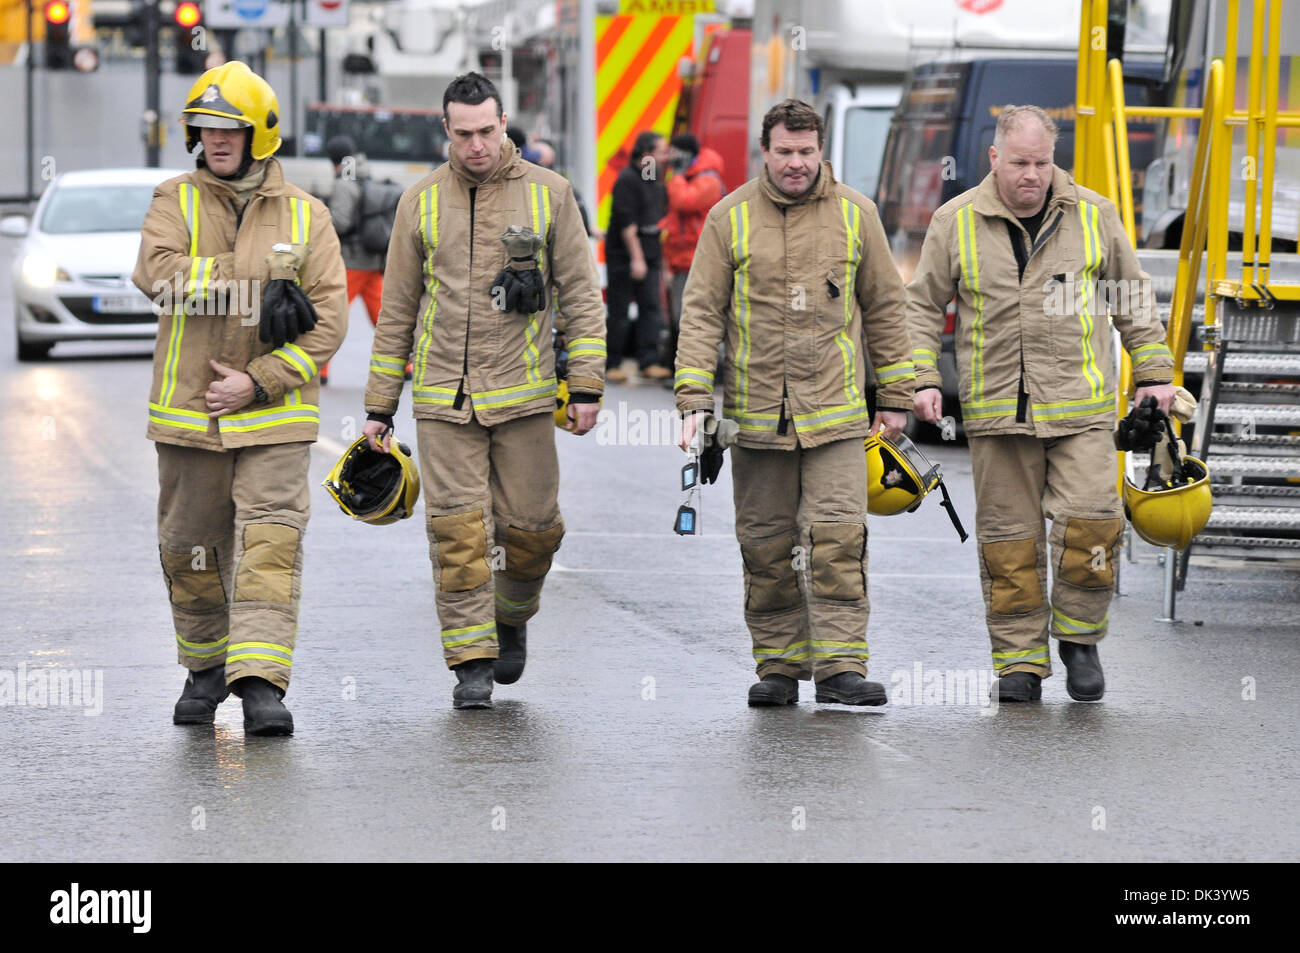 Fire men leaving the scene of the Clutha pub helicopter crash during the rescue operation. On Friday the 29th of November a helicopter crashed in to the Clutha Vaults bat in Glasgow on Stockwells Street. 9 people have been confirmed dead and several people have been taken to the hospital. Stock Photo